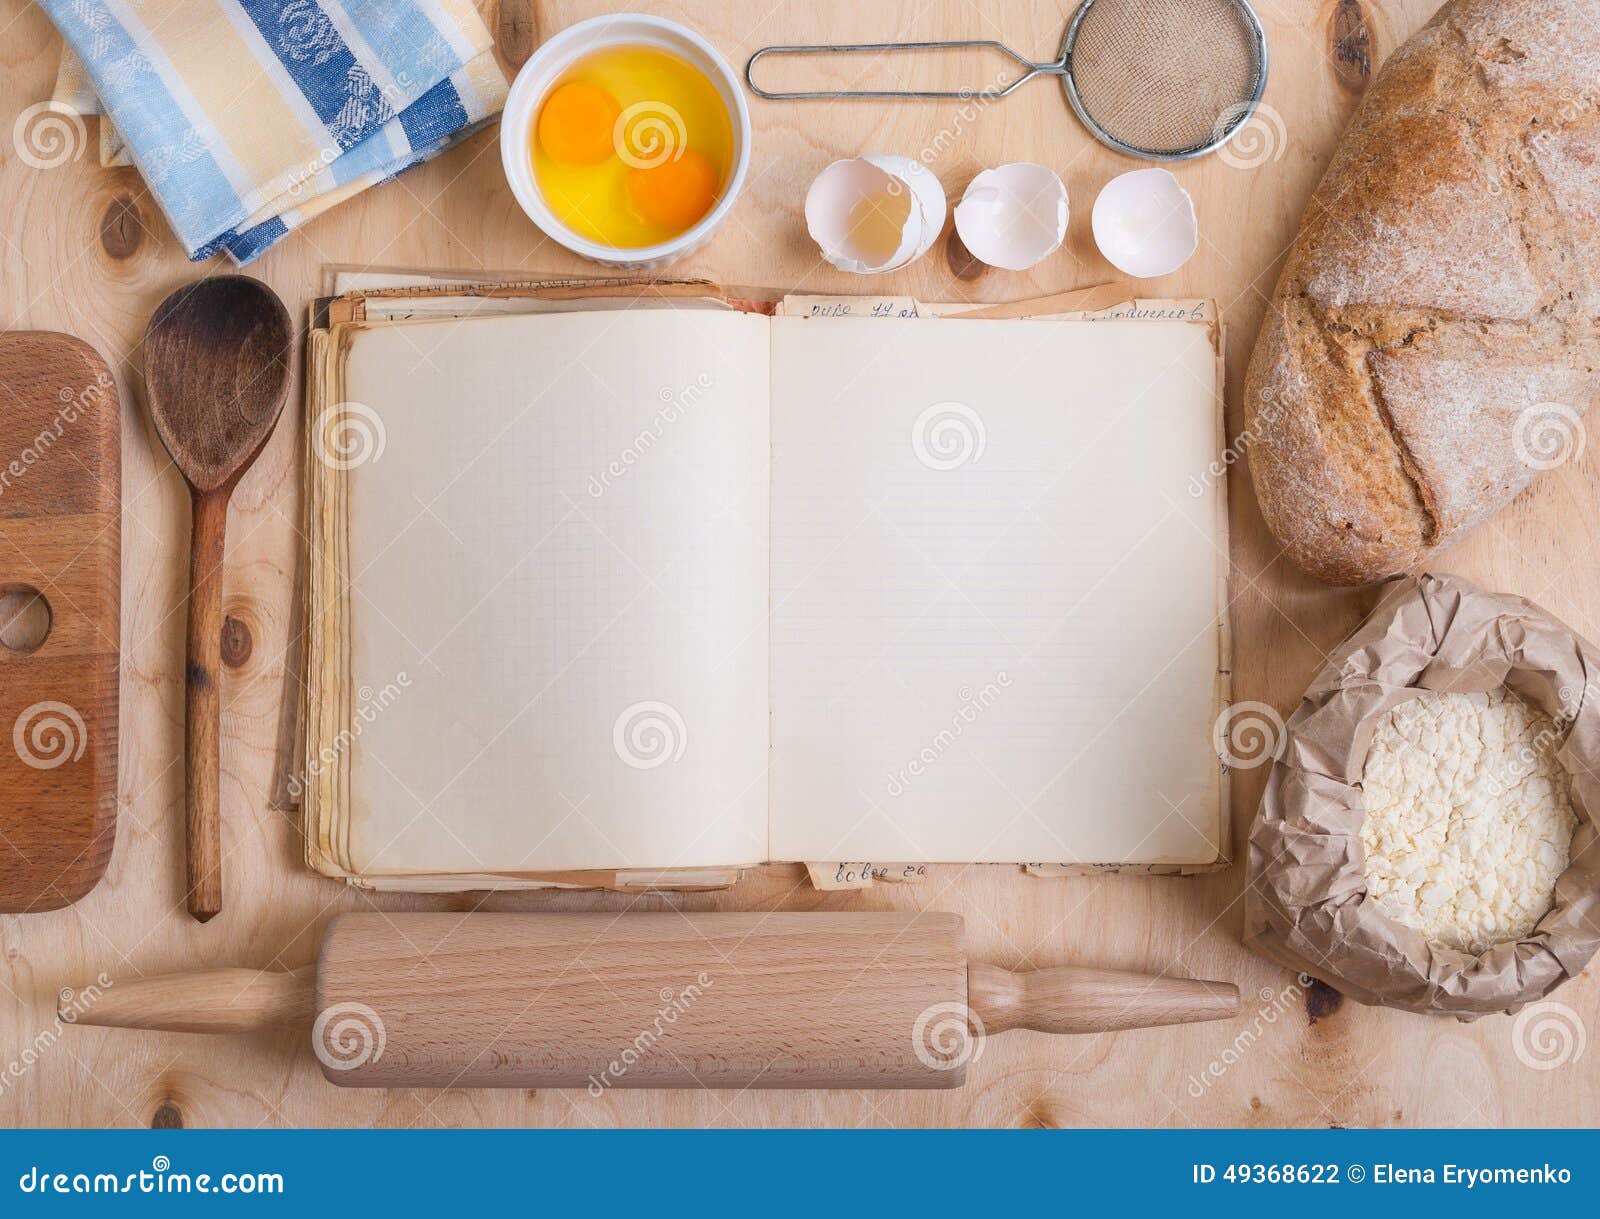 Baking Background With Blank Cook Book, Eggshell, Flour 